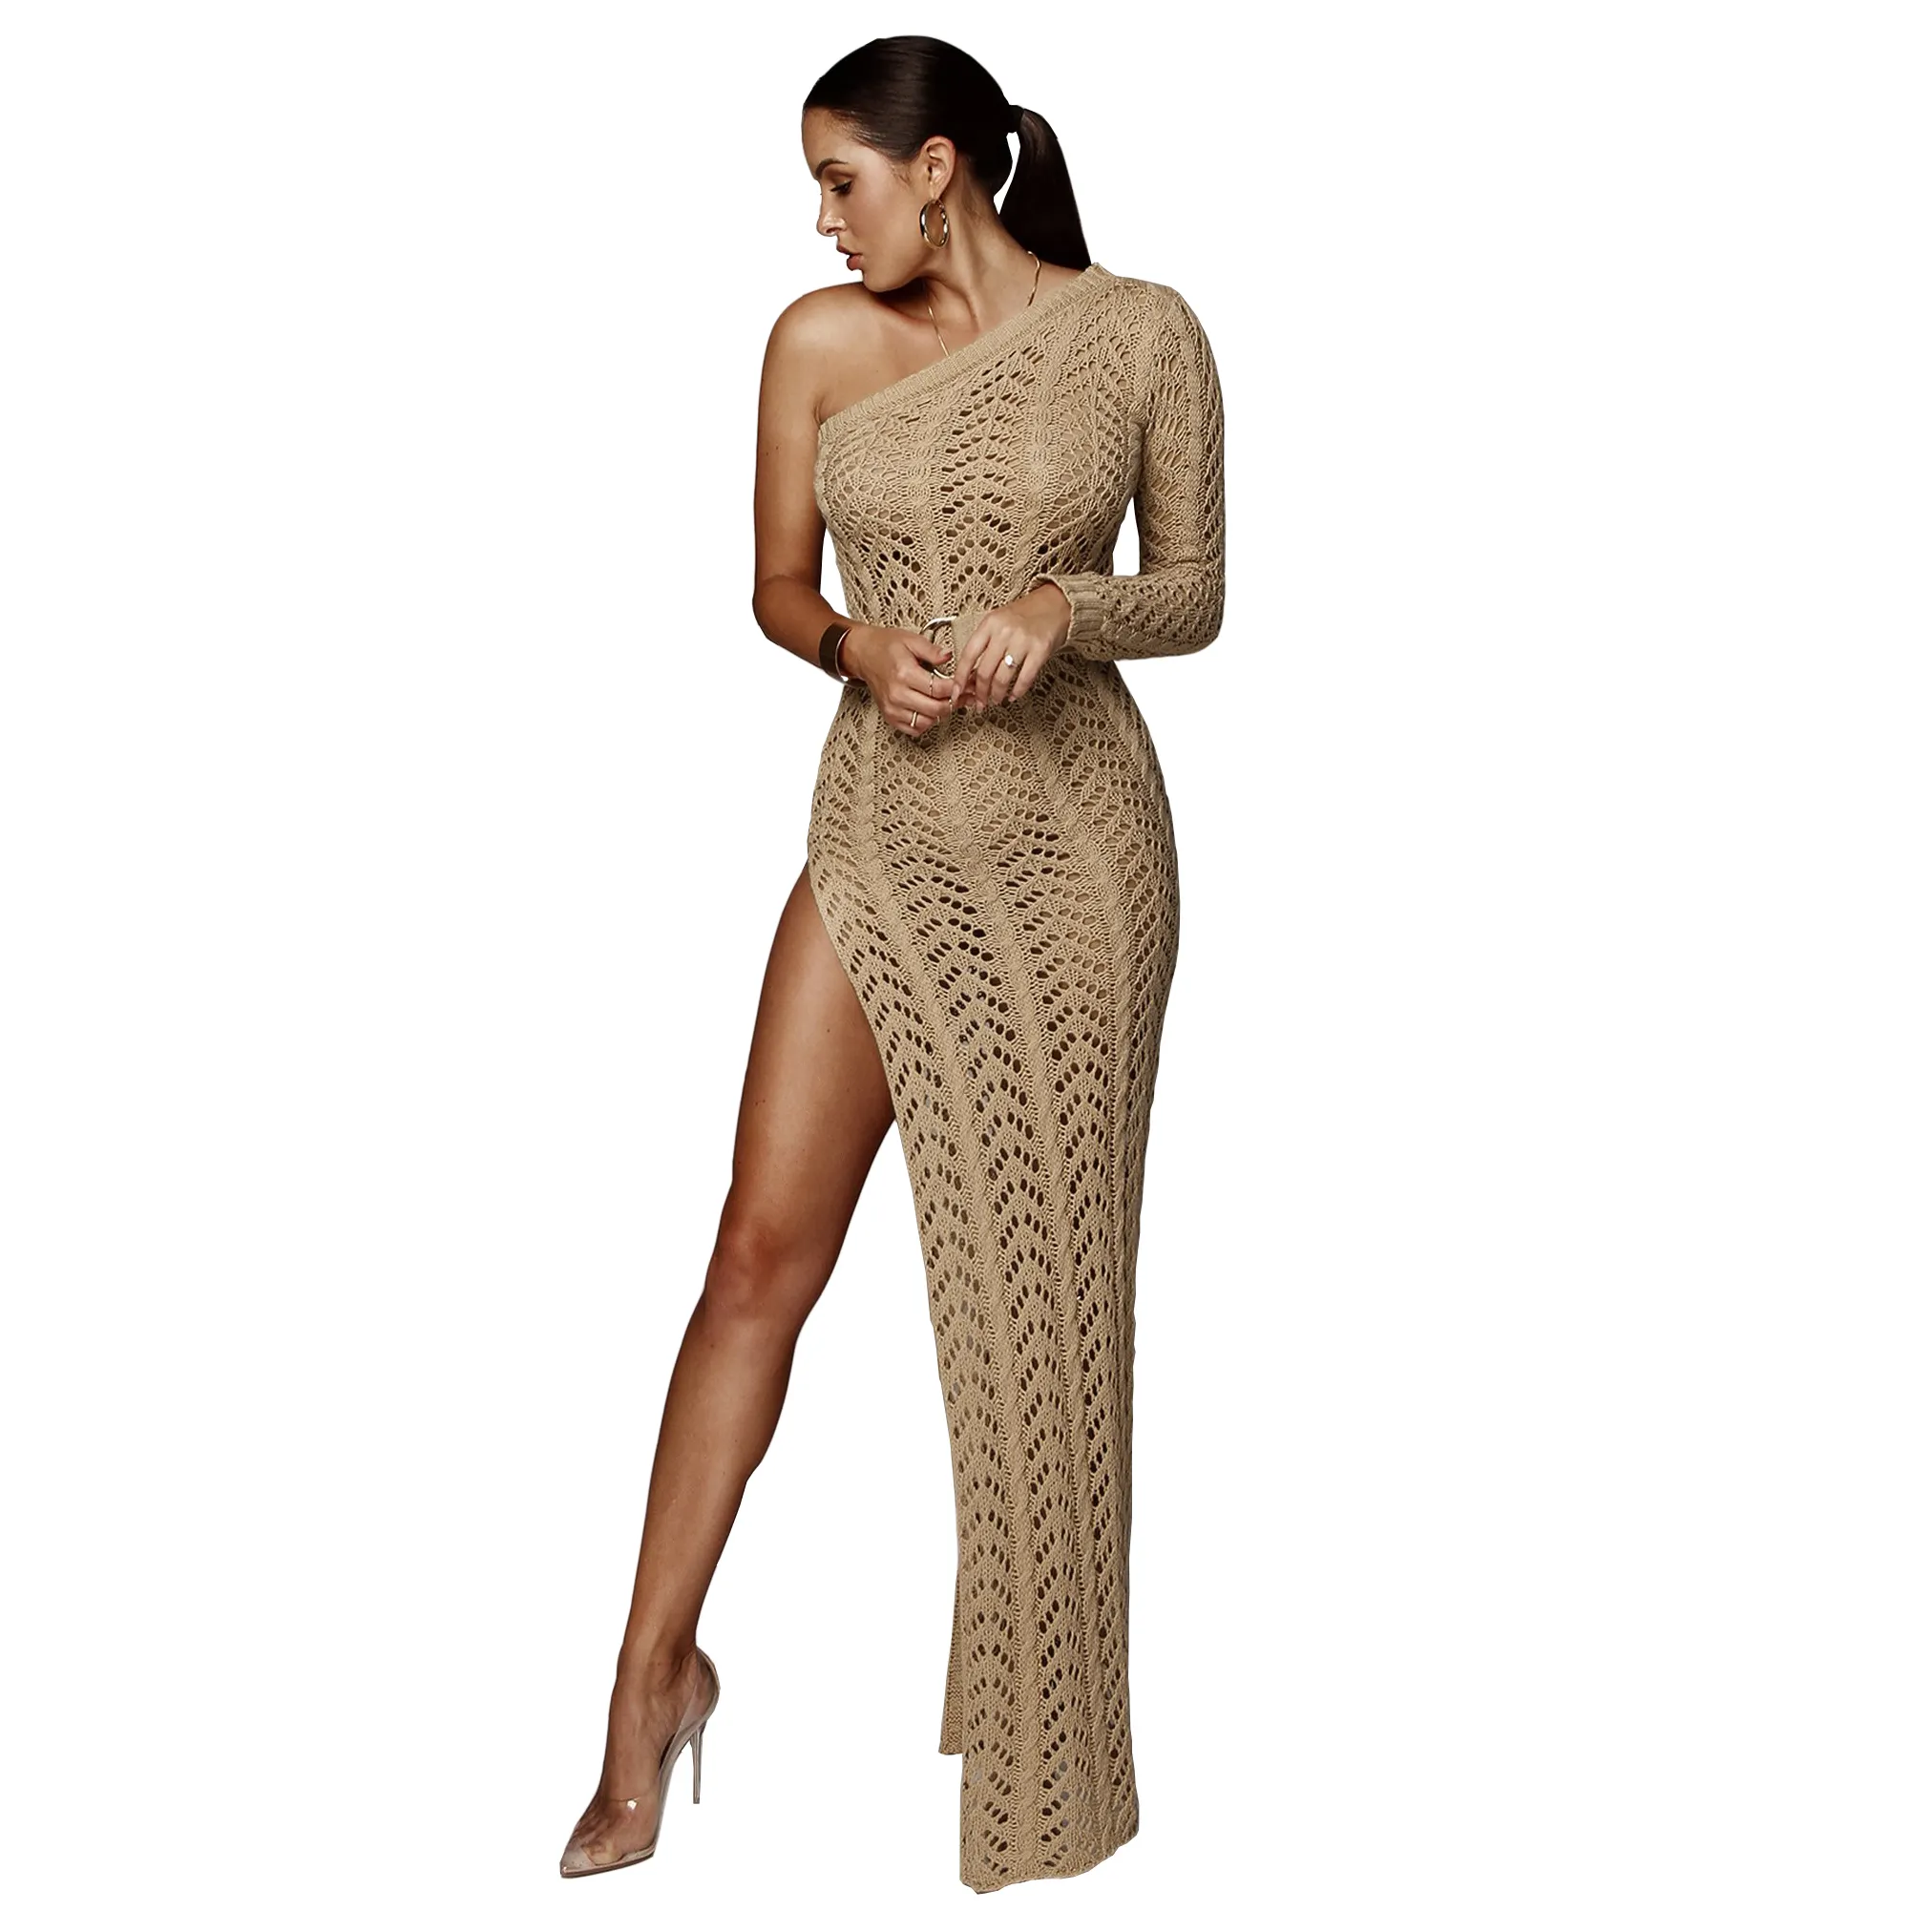 Fashion Slit One Shoulder Crochet Cover Up Beachwear Women Hallow Out Khaki Wrap Sexy Knitted Cover Up Beach Long dress